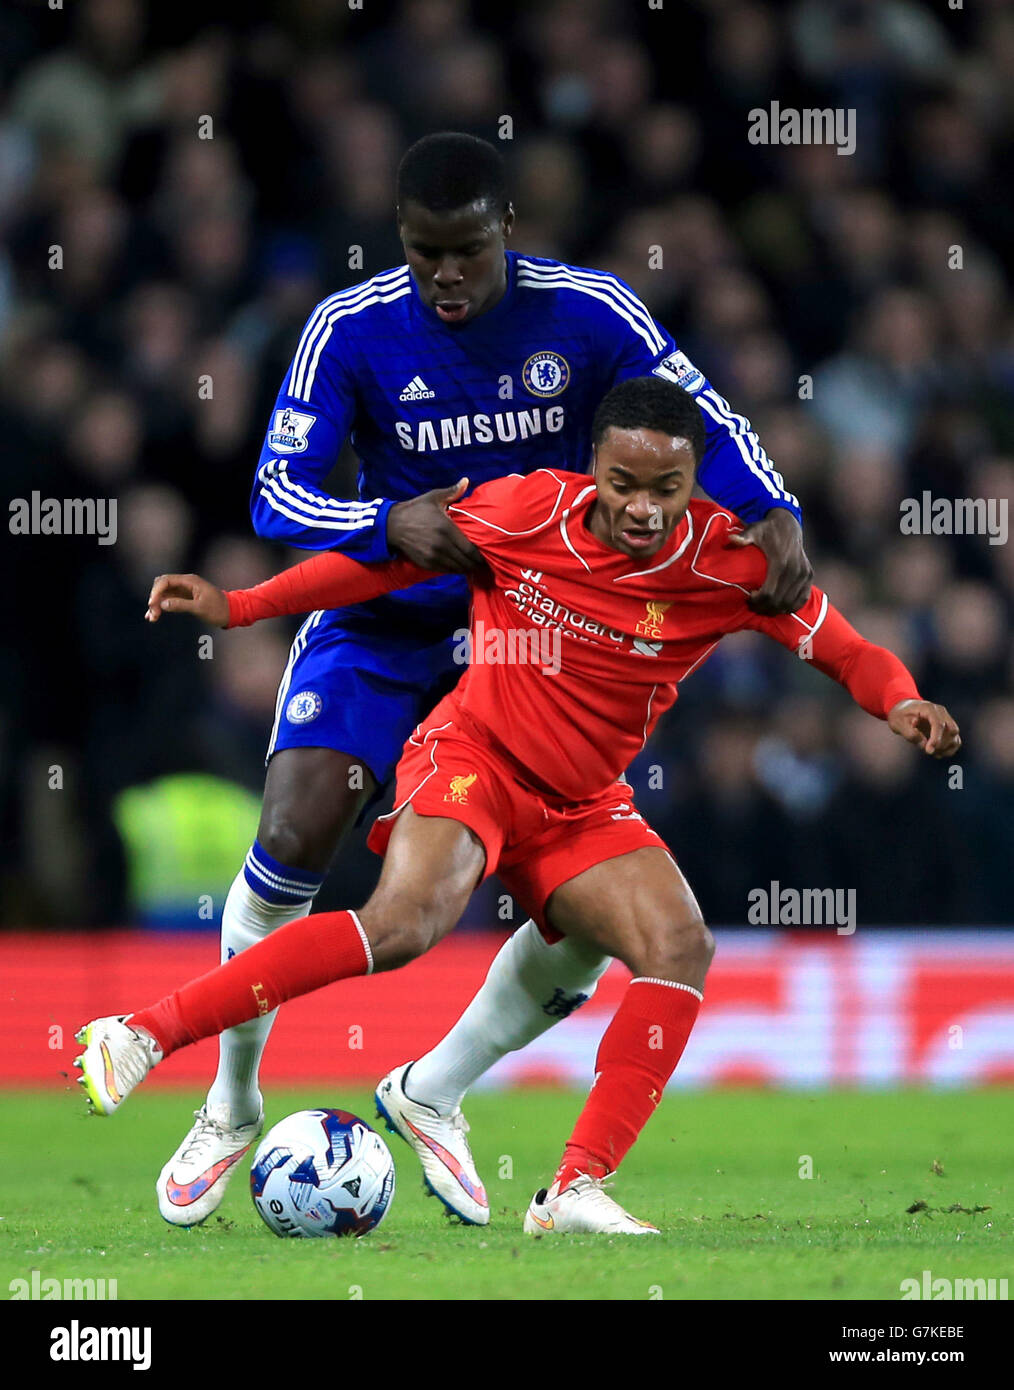 Chelsea's Kurt Zouma (left) and Liverpool's Raheem Sterling battle for the ball during the Capital One Cup Semi Final, Second Leg match at Stamford Bridge, London. PRESS ASSOCIATION Photo. Picture date: Tuesday January 27, 2015. See PA story: SOCCER Chelsea. Photo credit should read: Nick Potts/PA Wire. RESTRICTIONS: Maximum 45 images during a match. No video emulation or promotion as 'live'. No use in games, competitions, merchandise, betting or single club/player services. No use with unofficial audio, video, data, fixtures or club/league Stock Photo